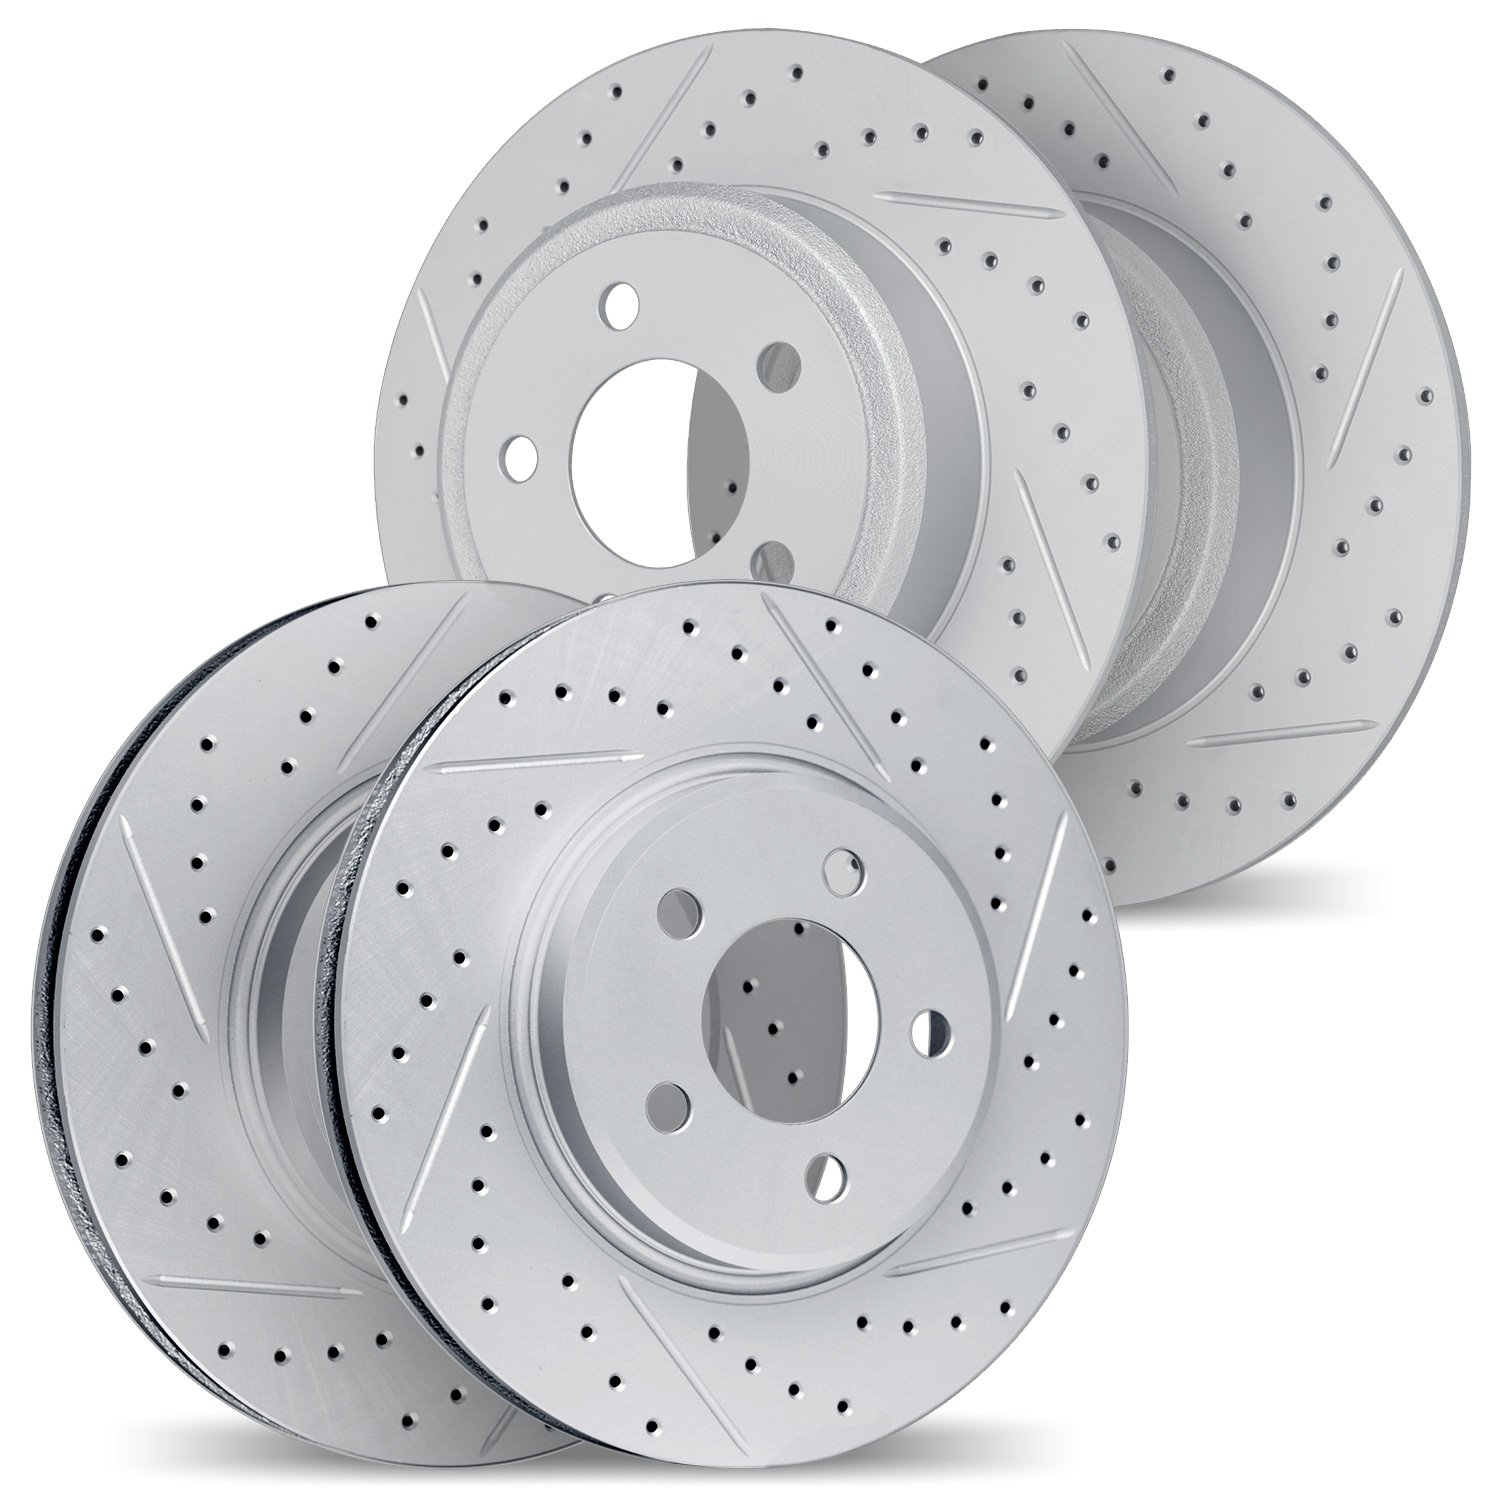 2004-21008 Geoperformance Drilled/Slotted Brake Rotors, 2007-2010 Kia/Hyundai/Genesis, Position: Front and Rear